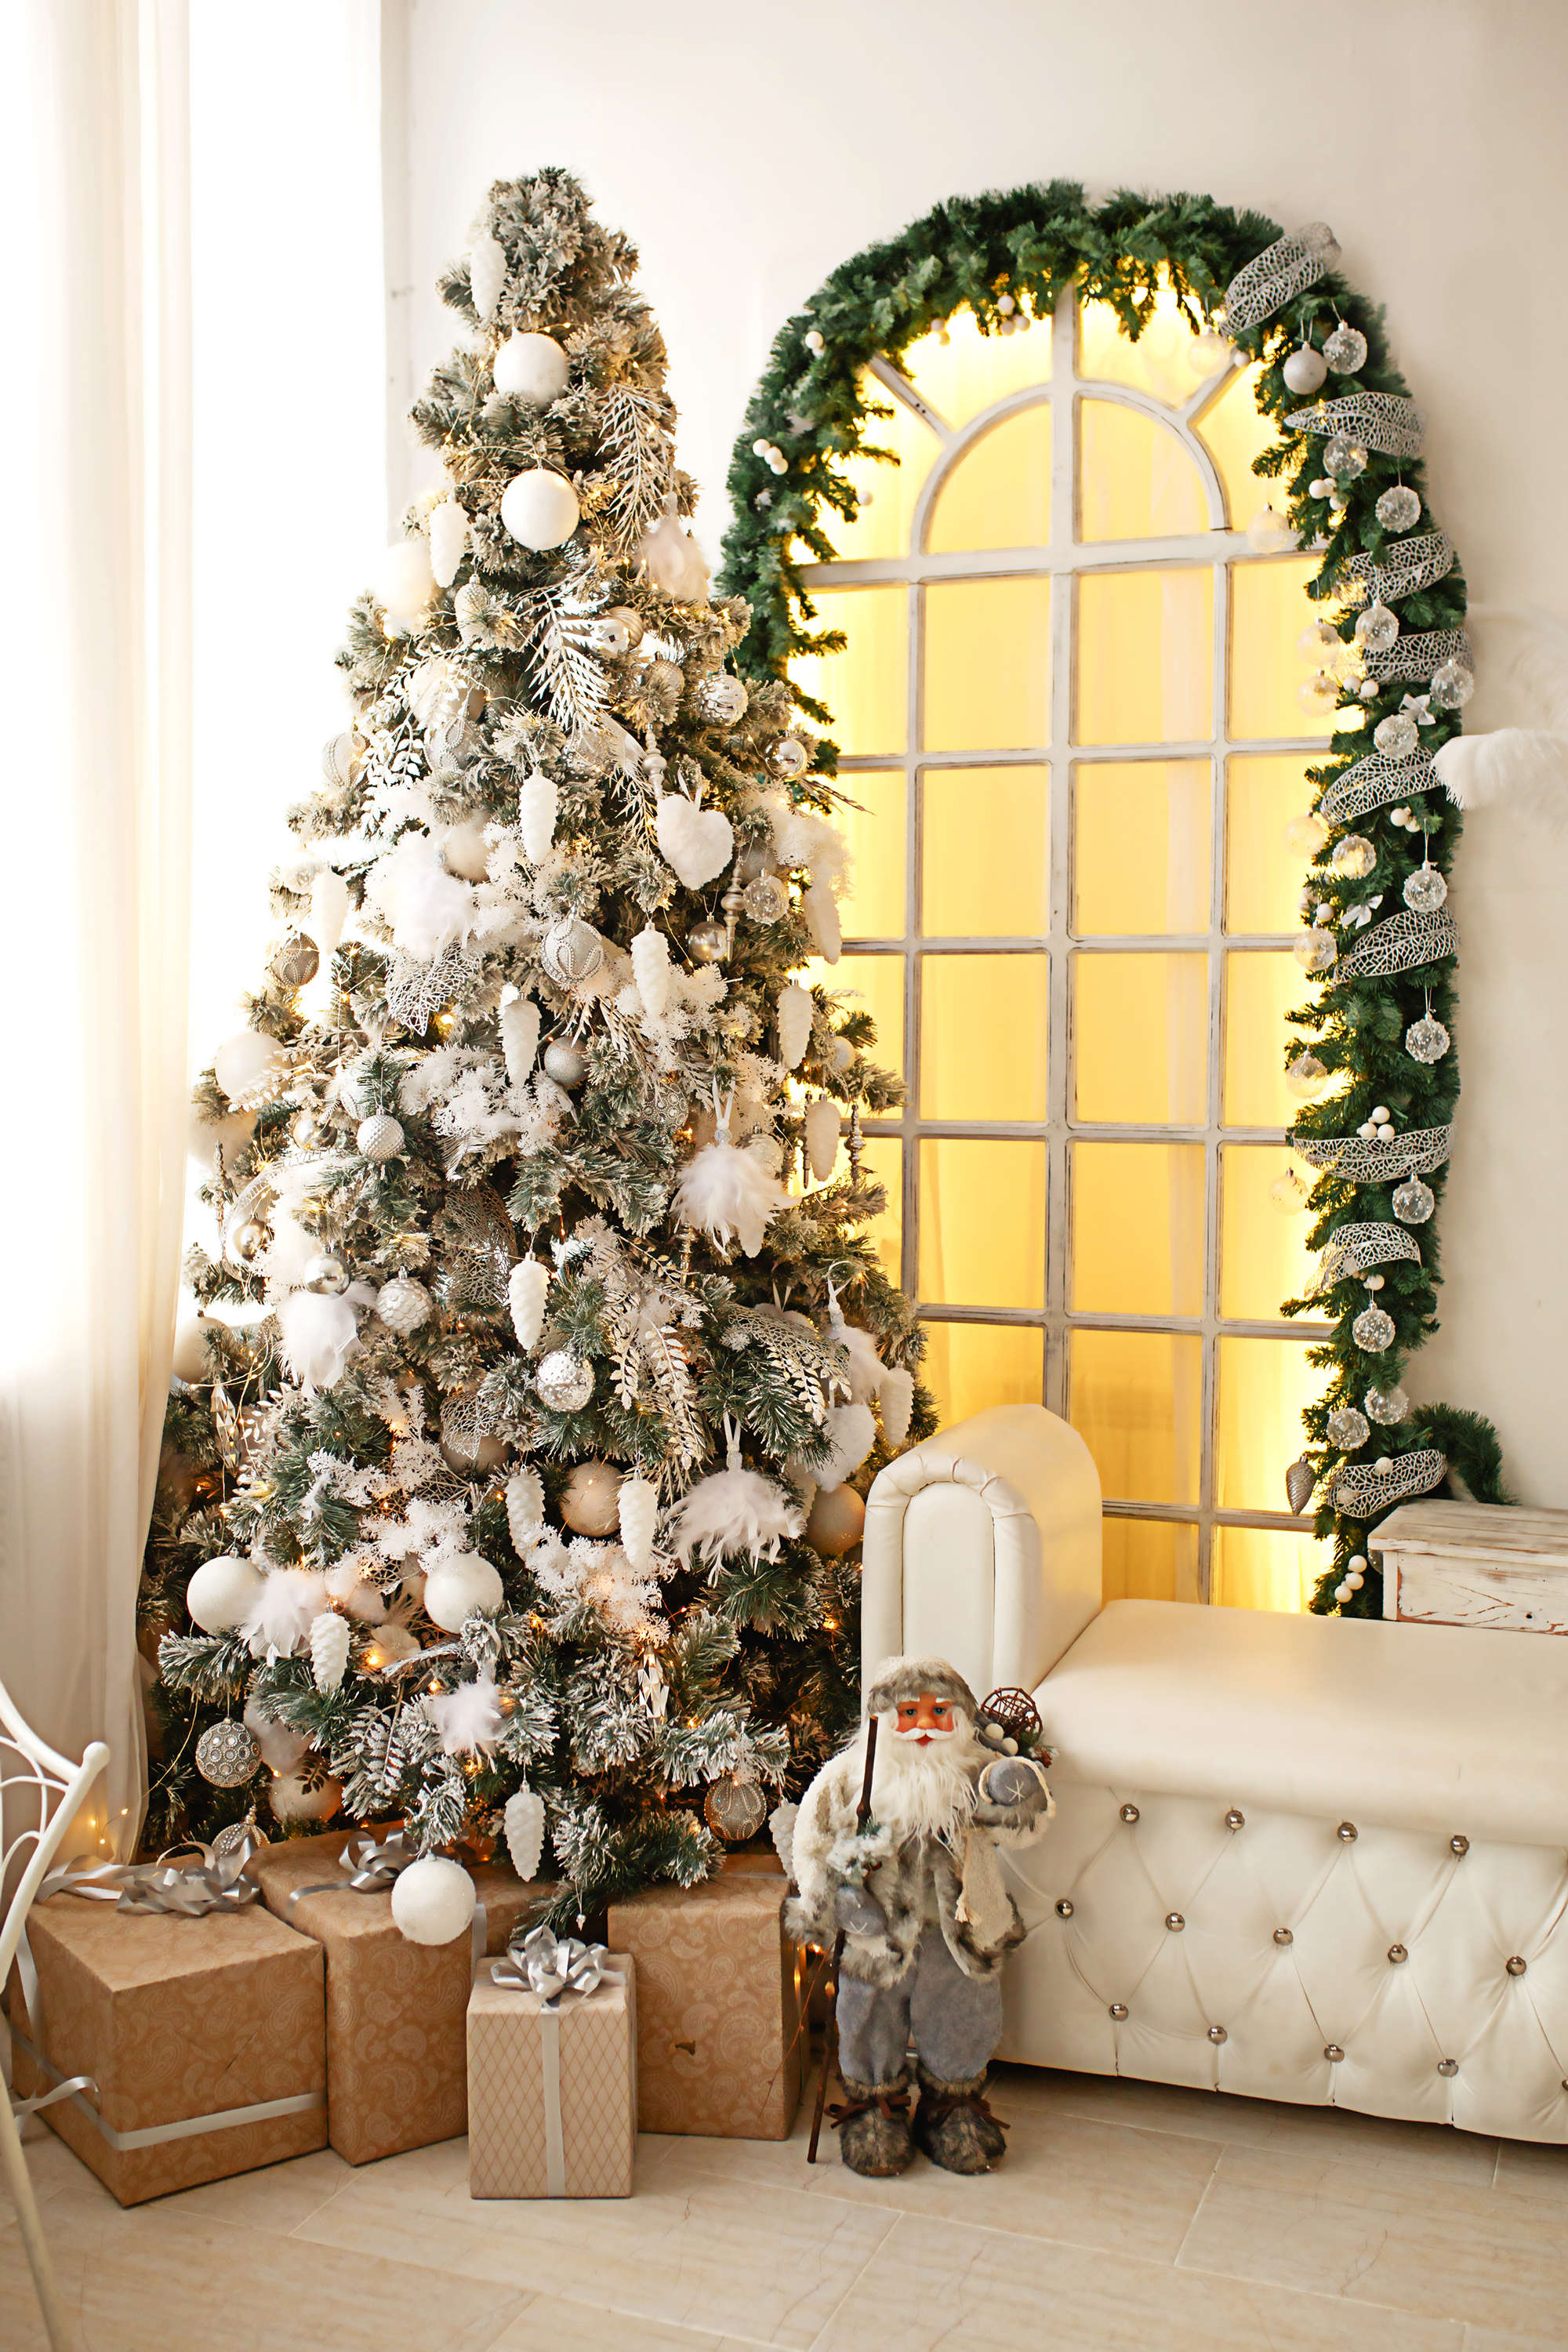 garland framing interior arched window near decorated Christmas tree